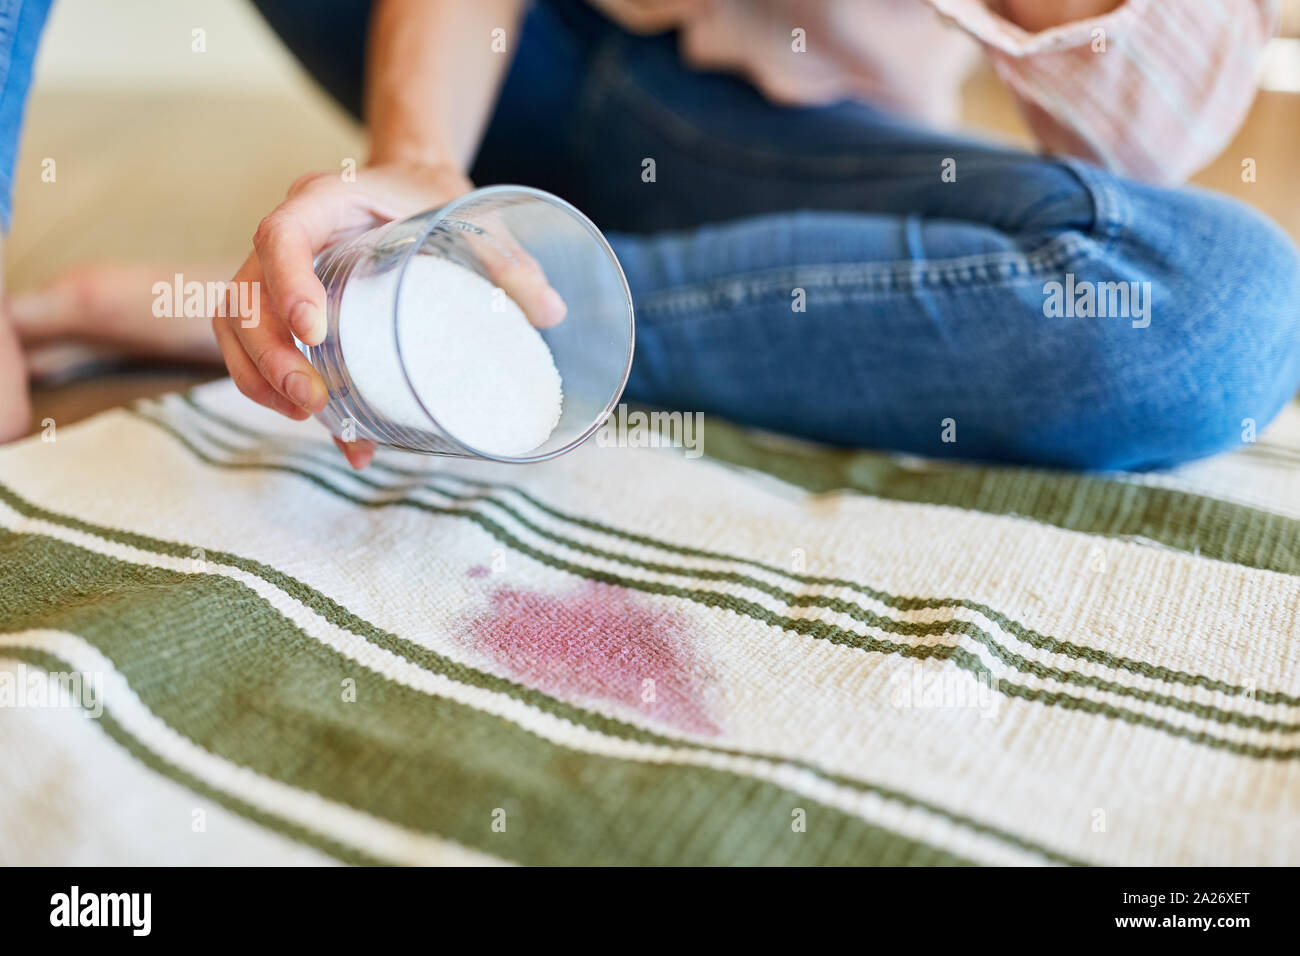 Salt as a home remedy against red wine stains on the carpet in the living room Stock Photo